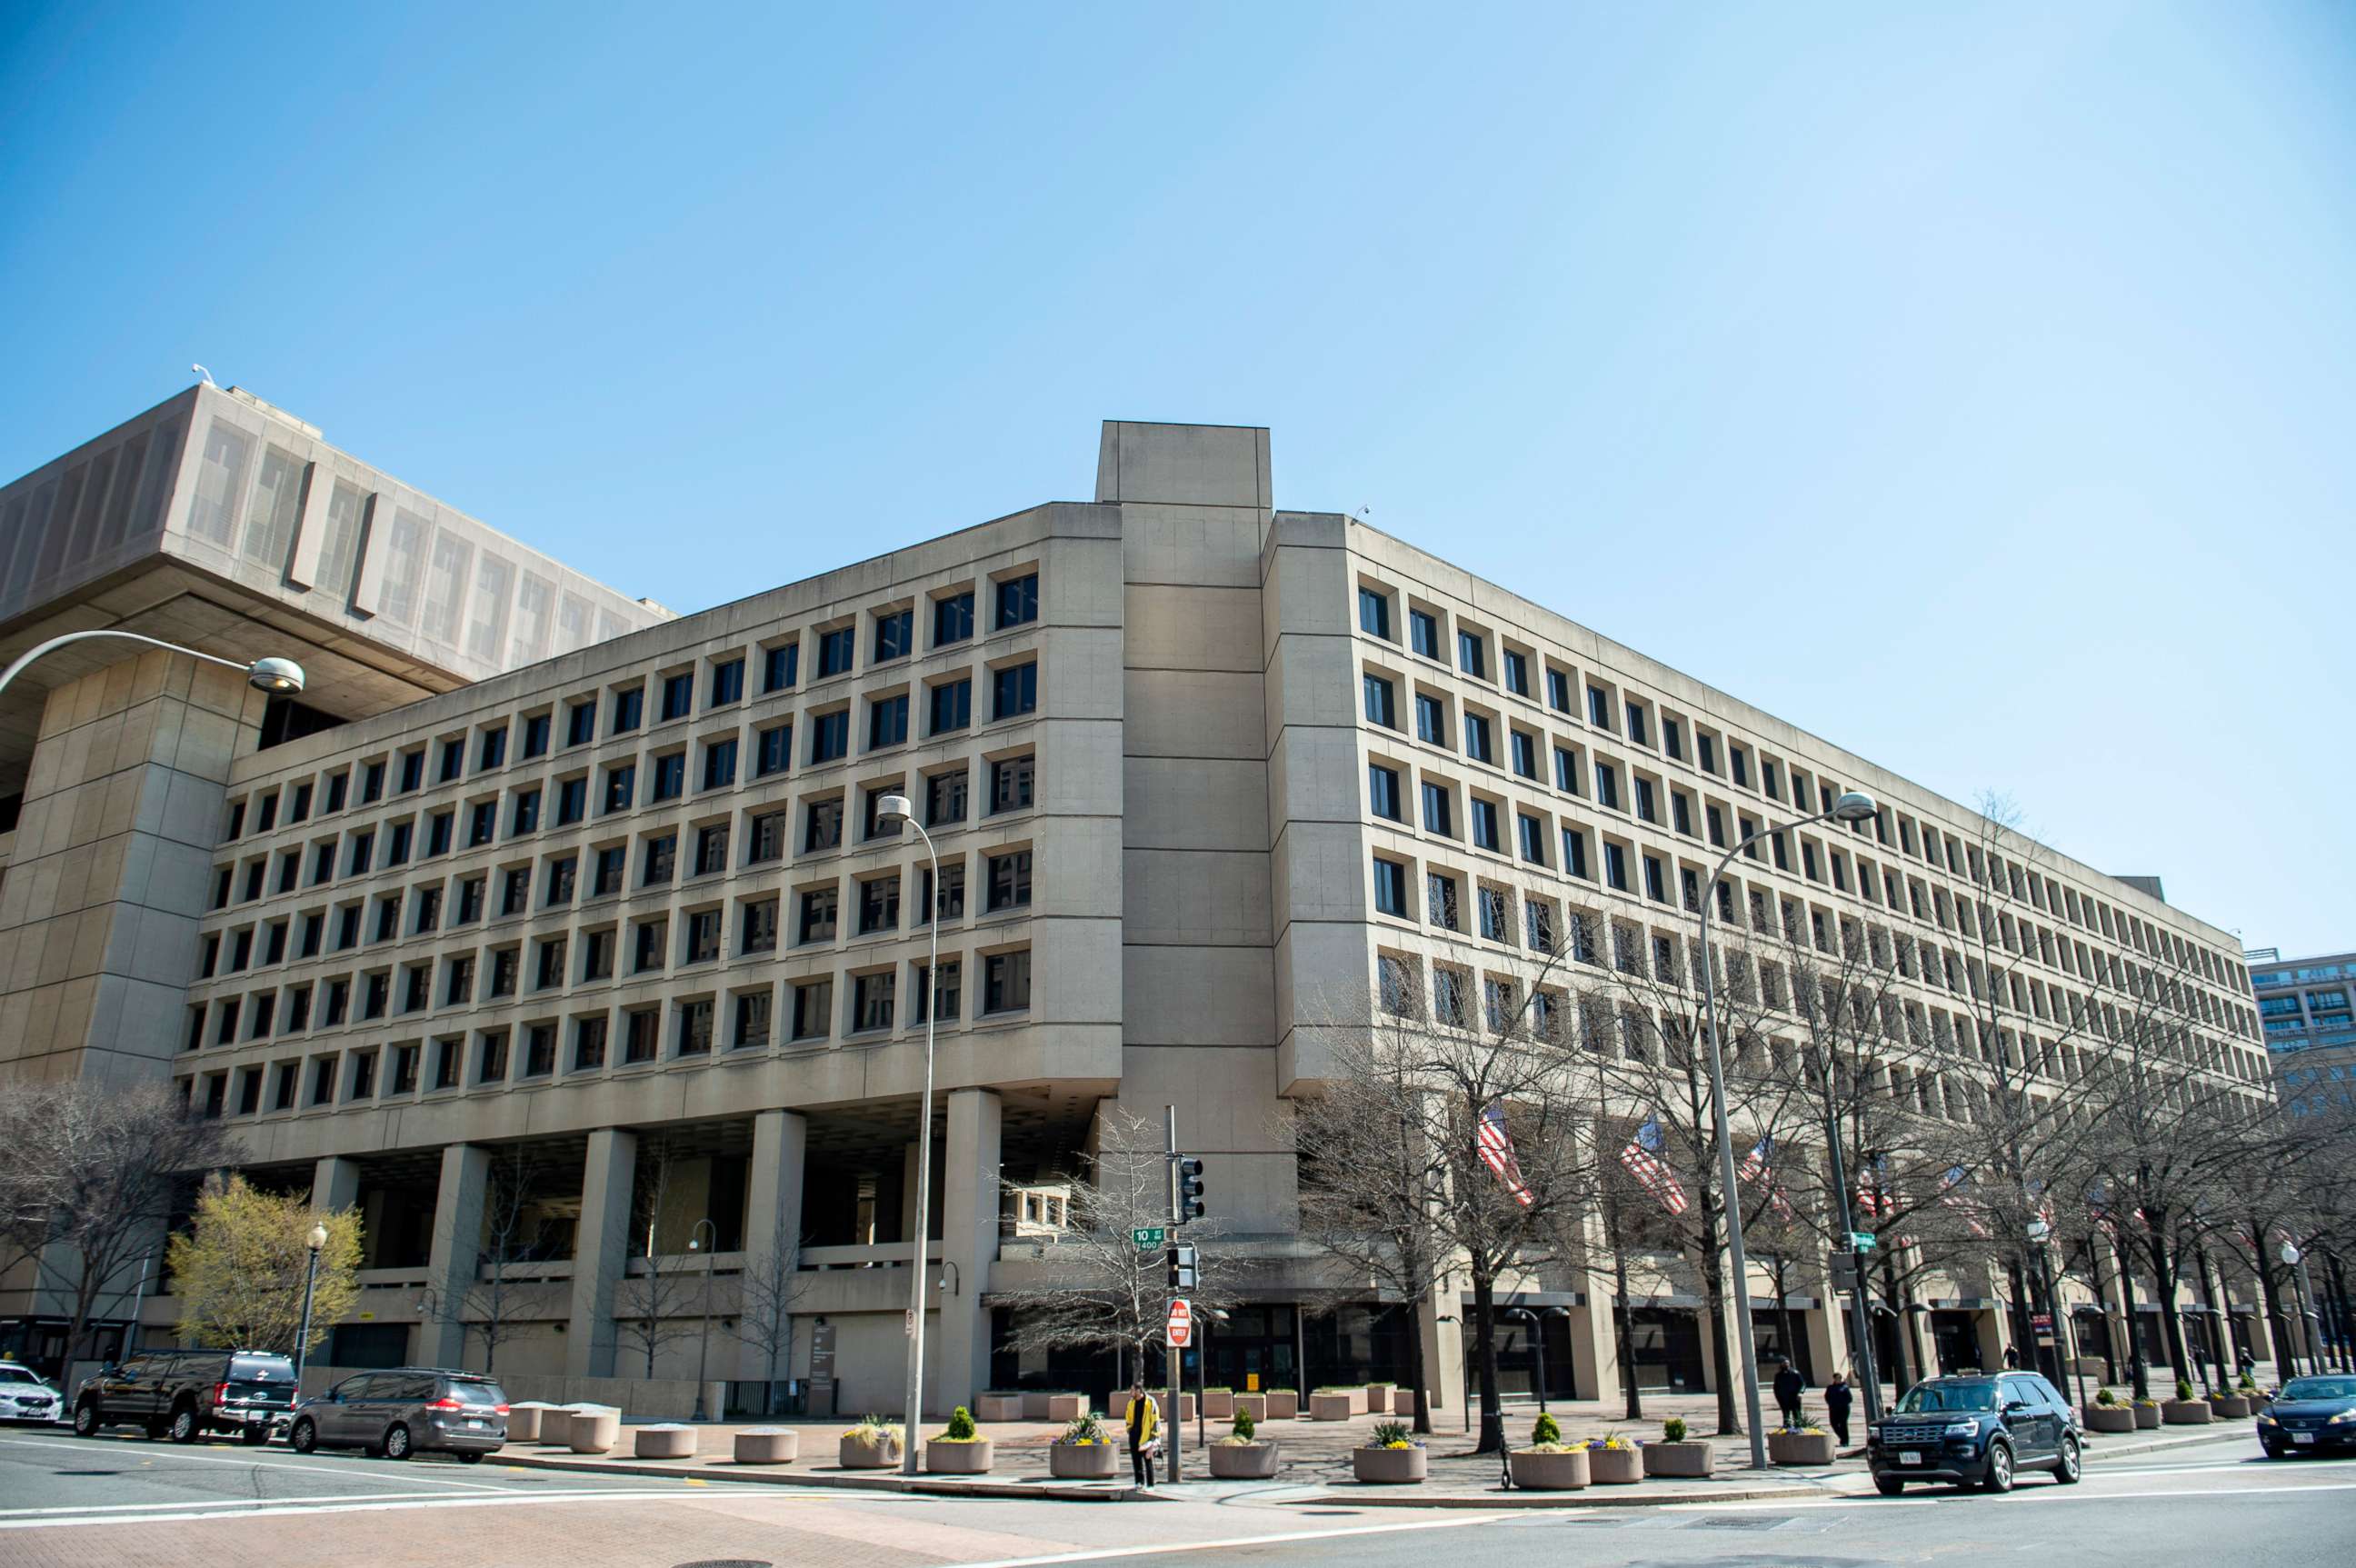 PHOTO: The Federal Bureau of Investigation is headquartered in the J. Edgar Hoover Building in Washington, D.C., April 03, 2019.